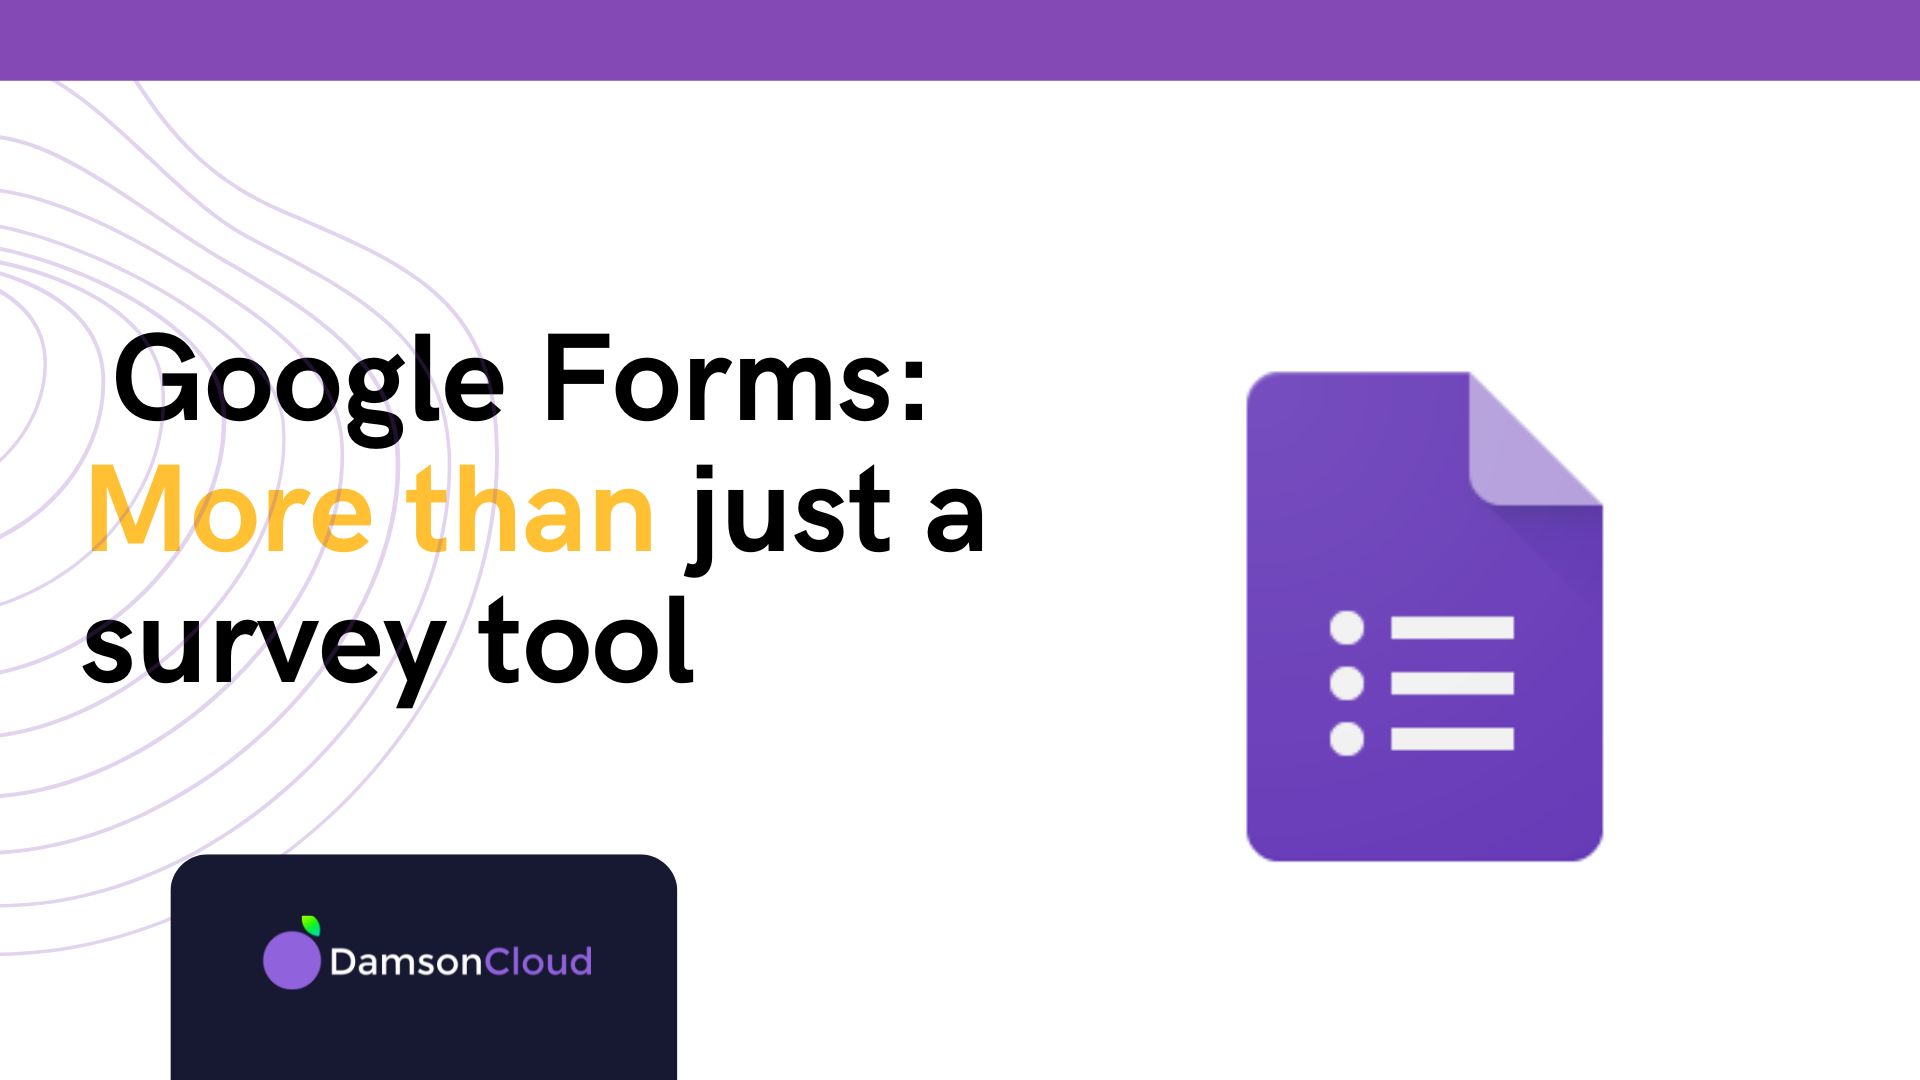 Getting the most from Google Forms